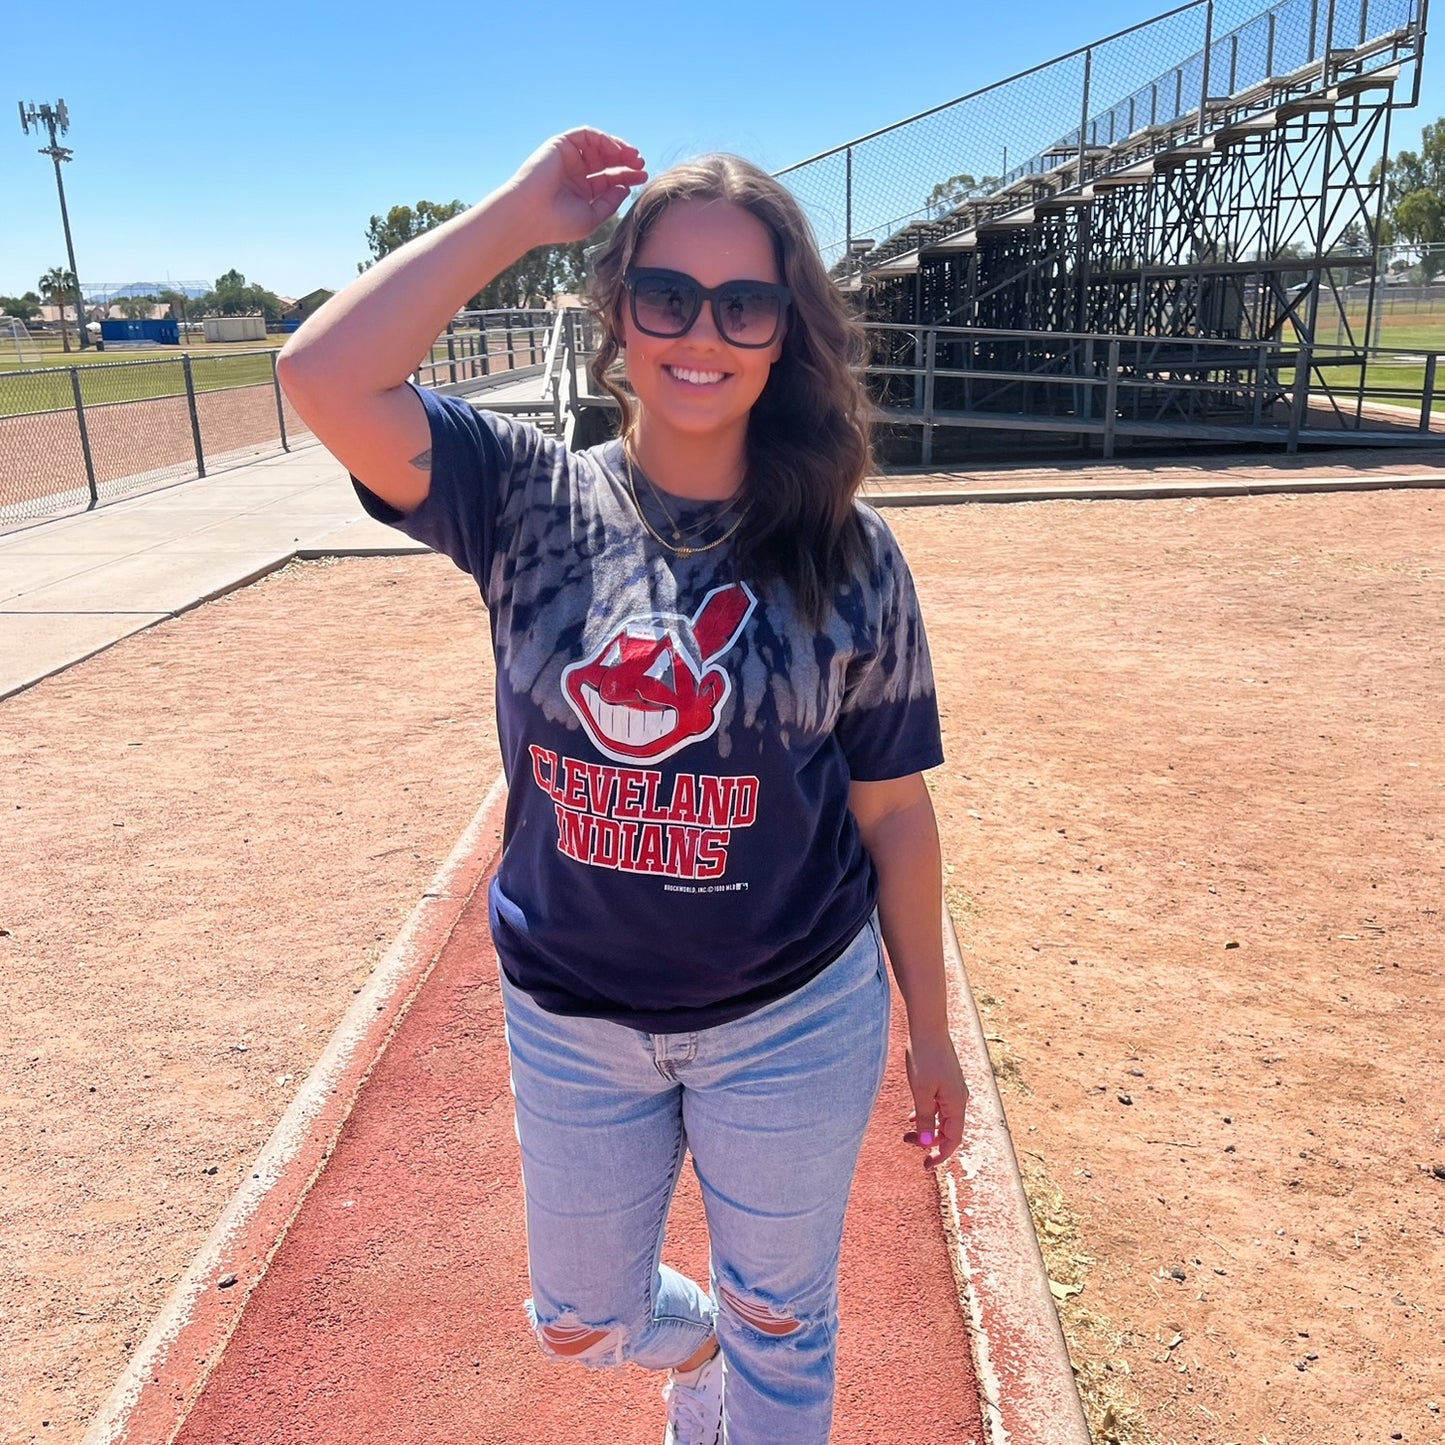 CLEVELAND INDIANS TEE